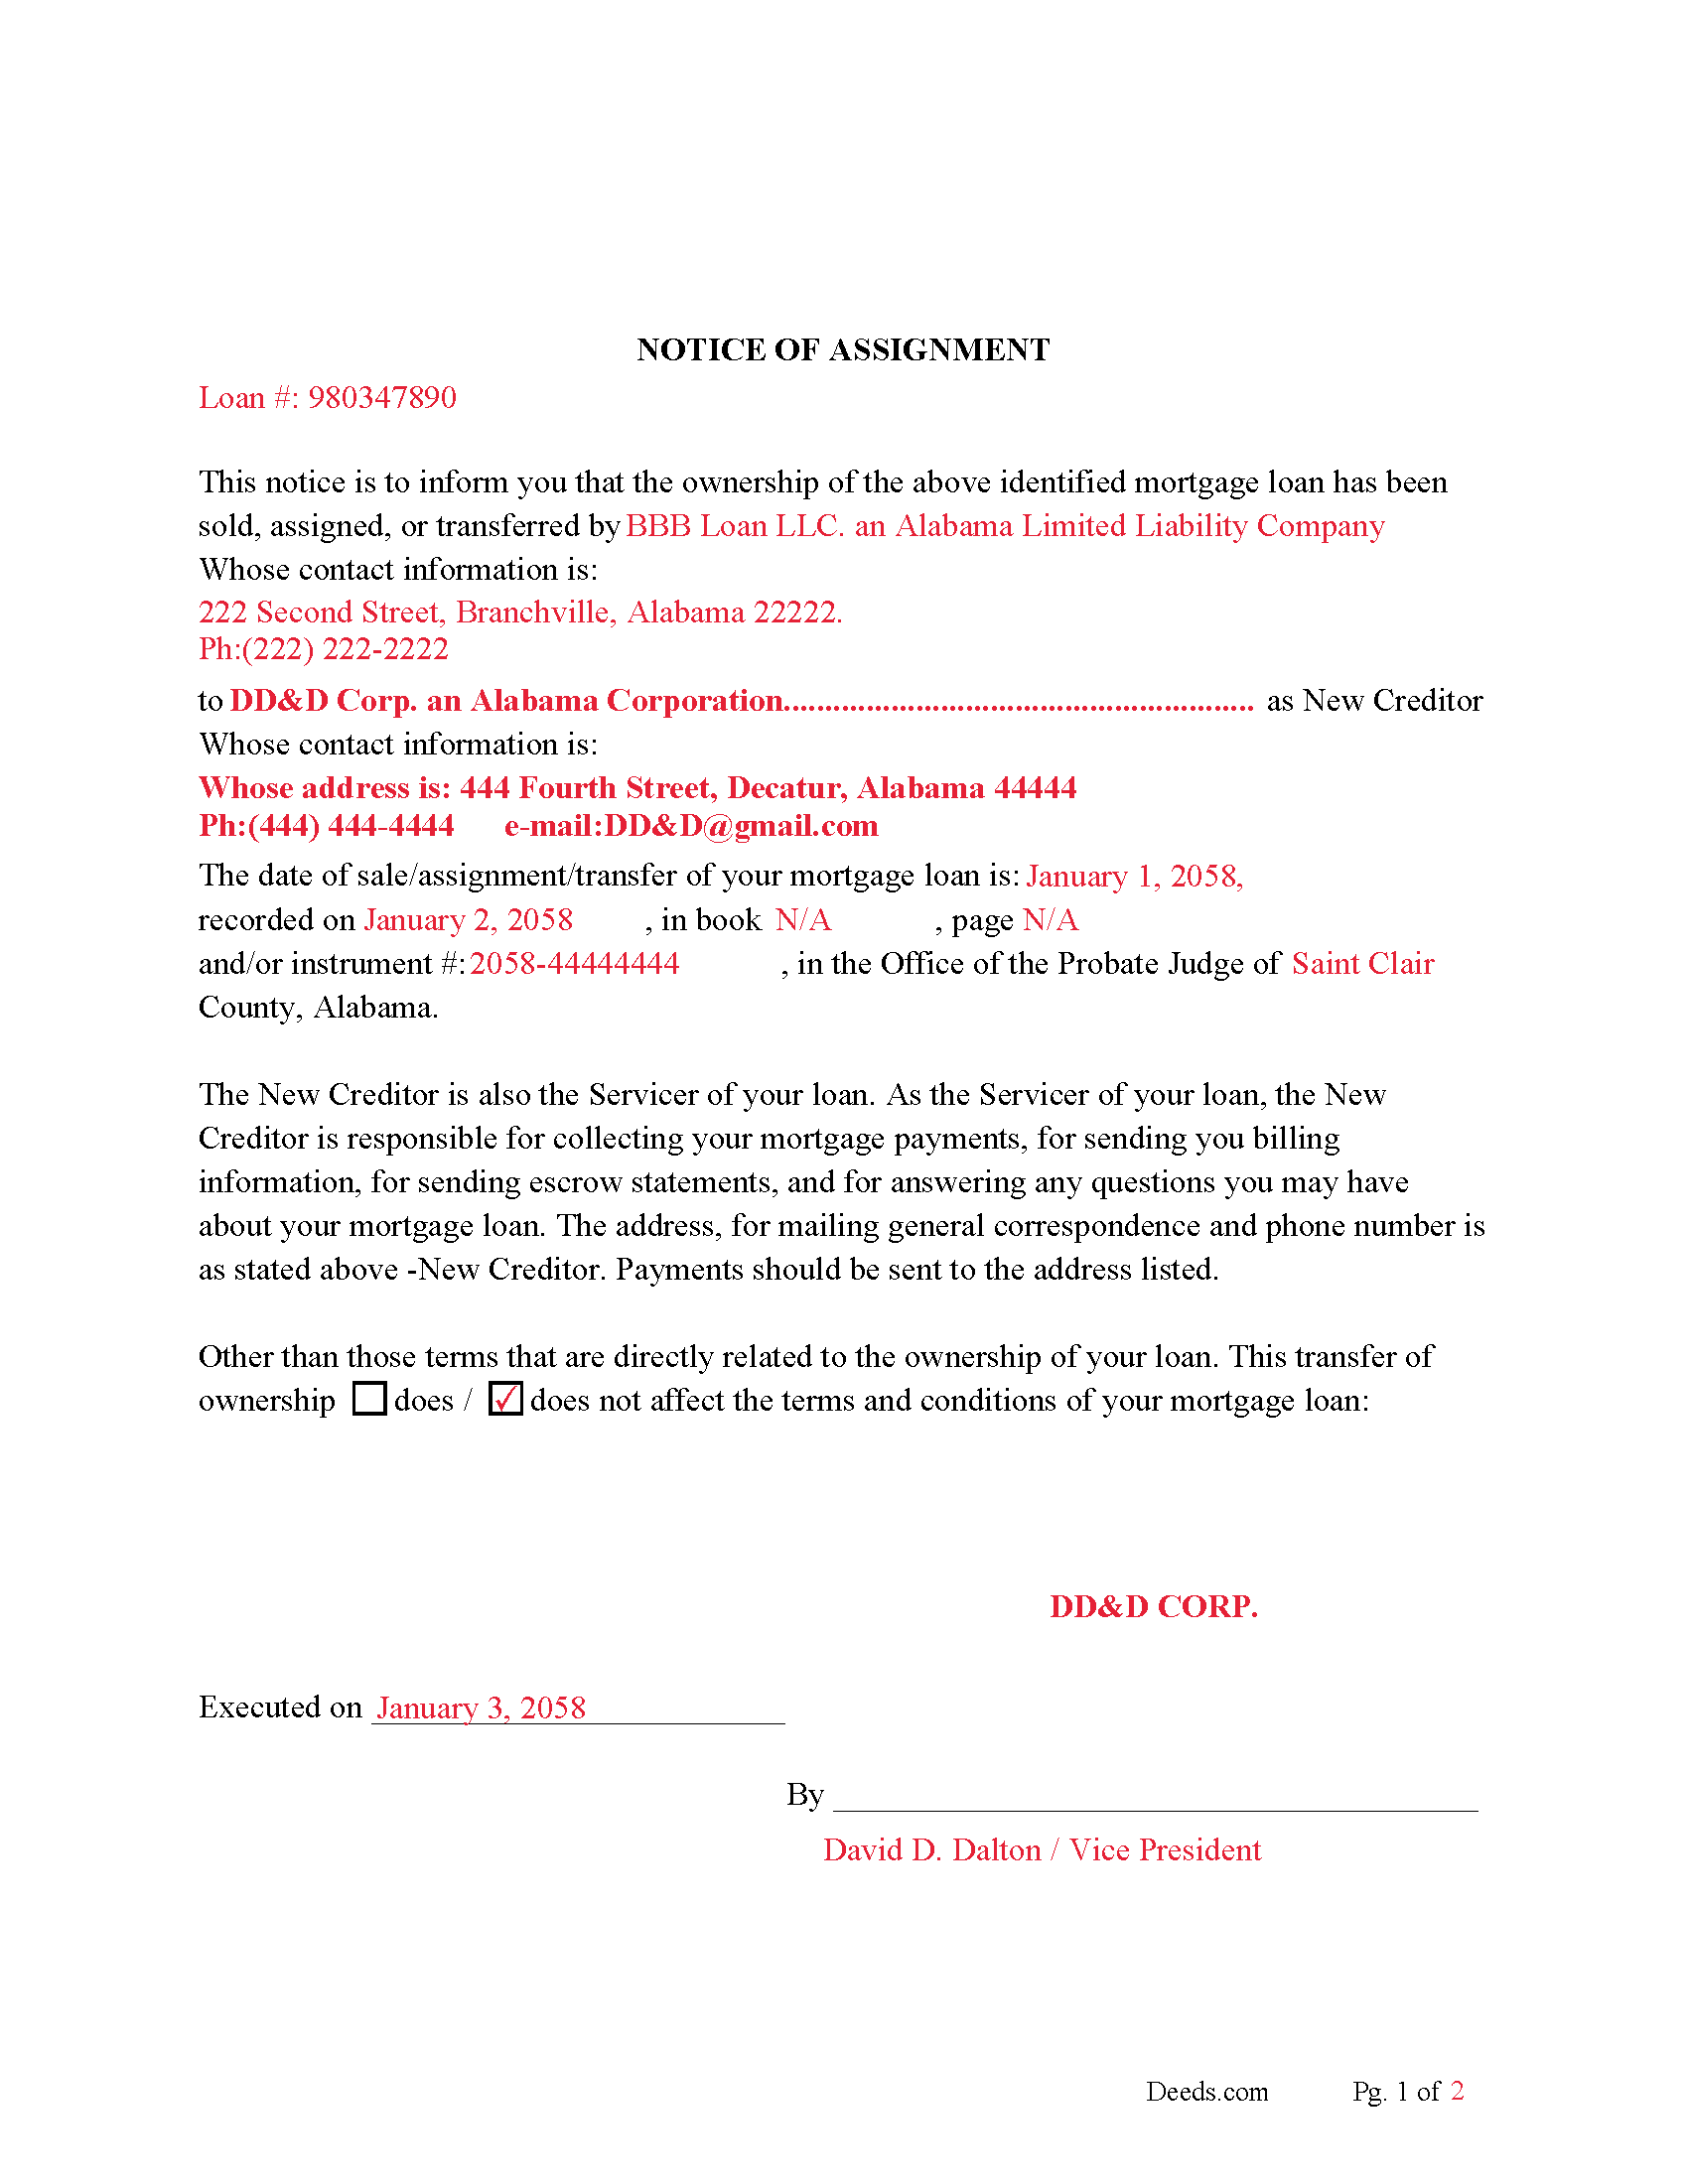 Notice of Assignment-Completed Example